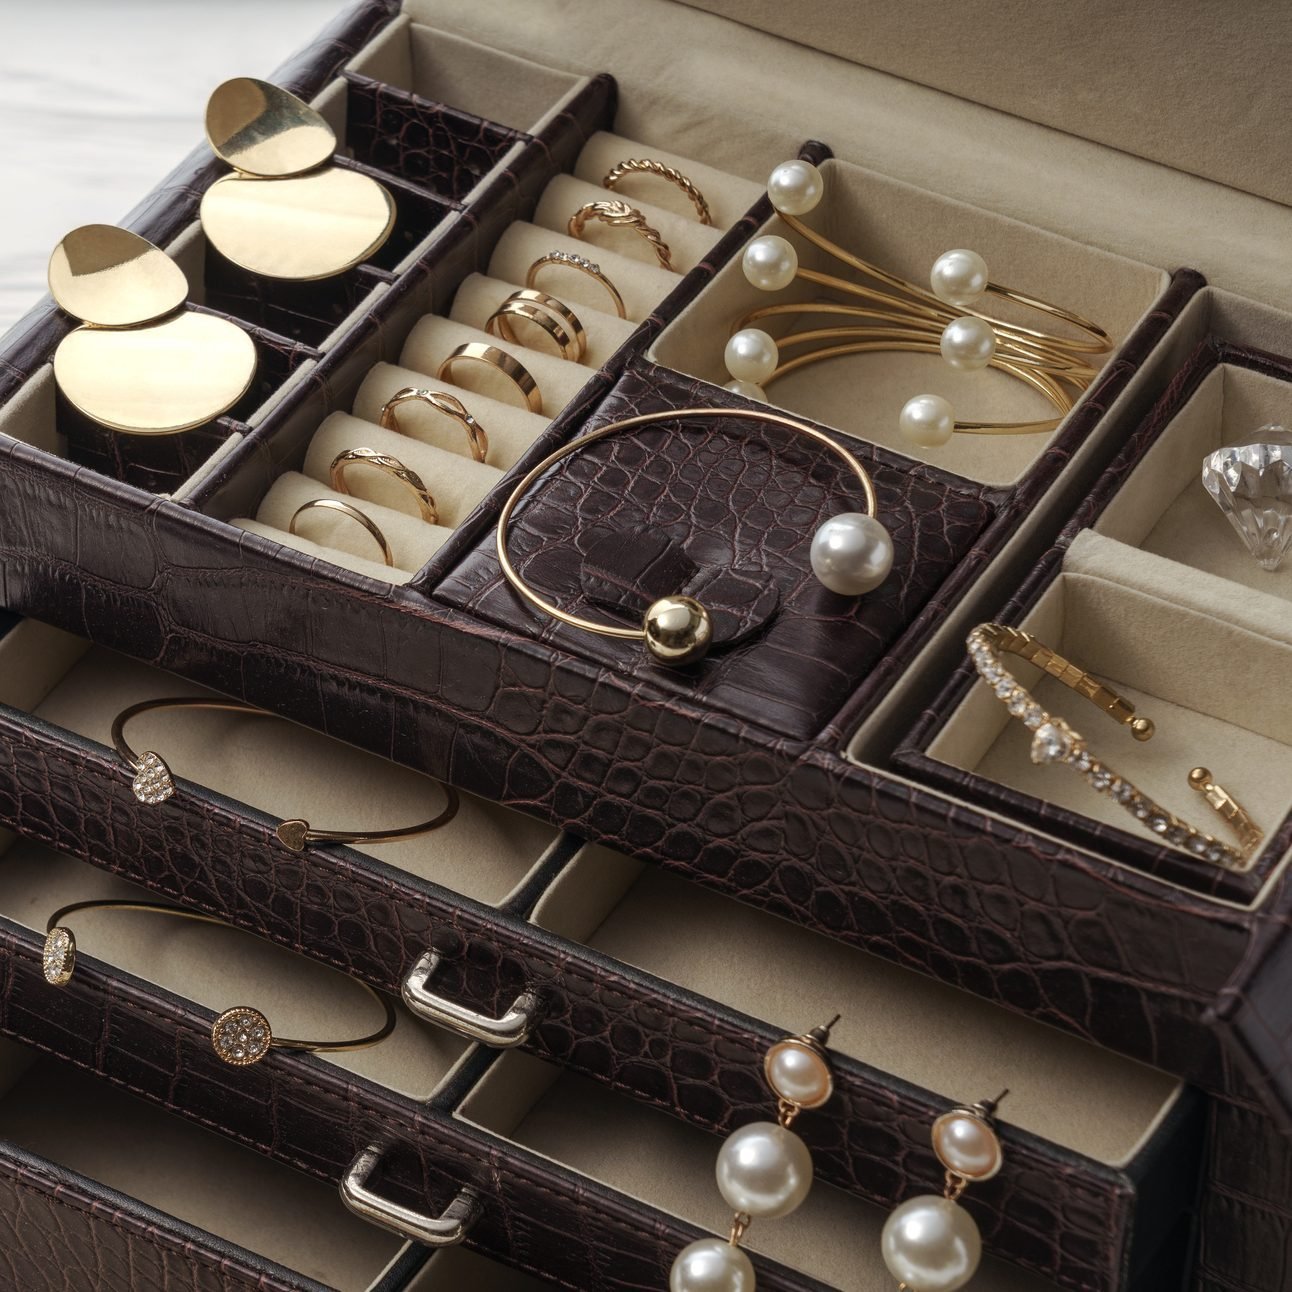 12 Jewelry Storage Ideas to Smartly Display Your Accessories